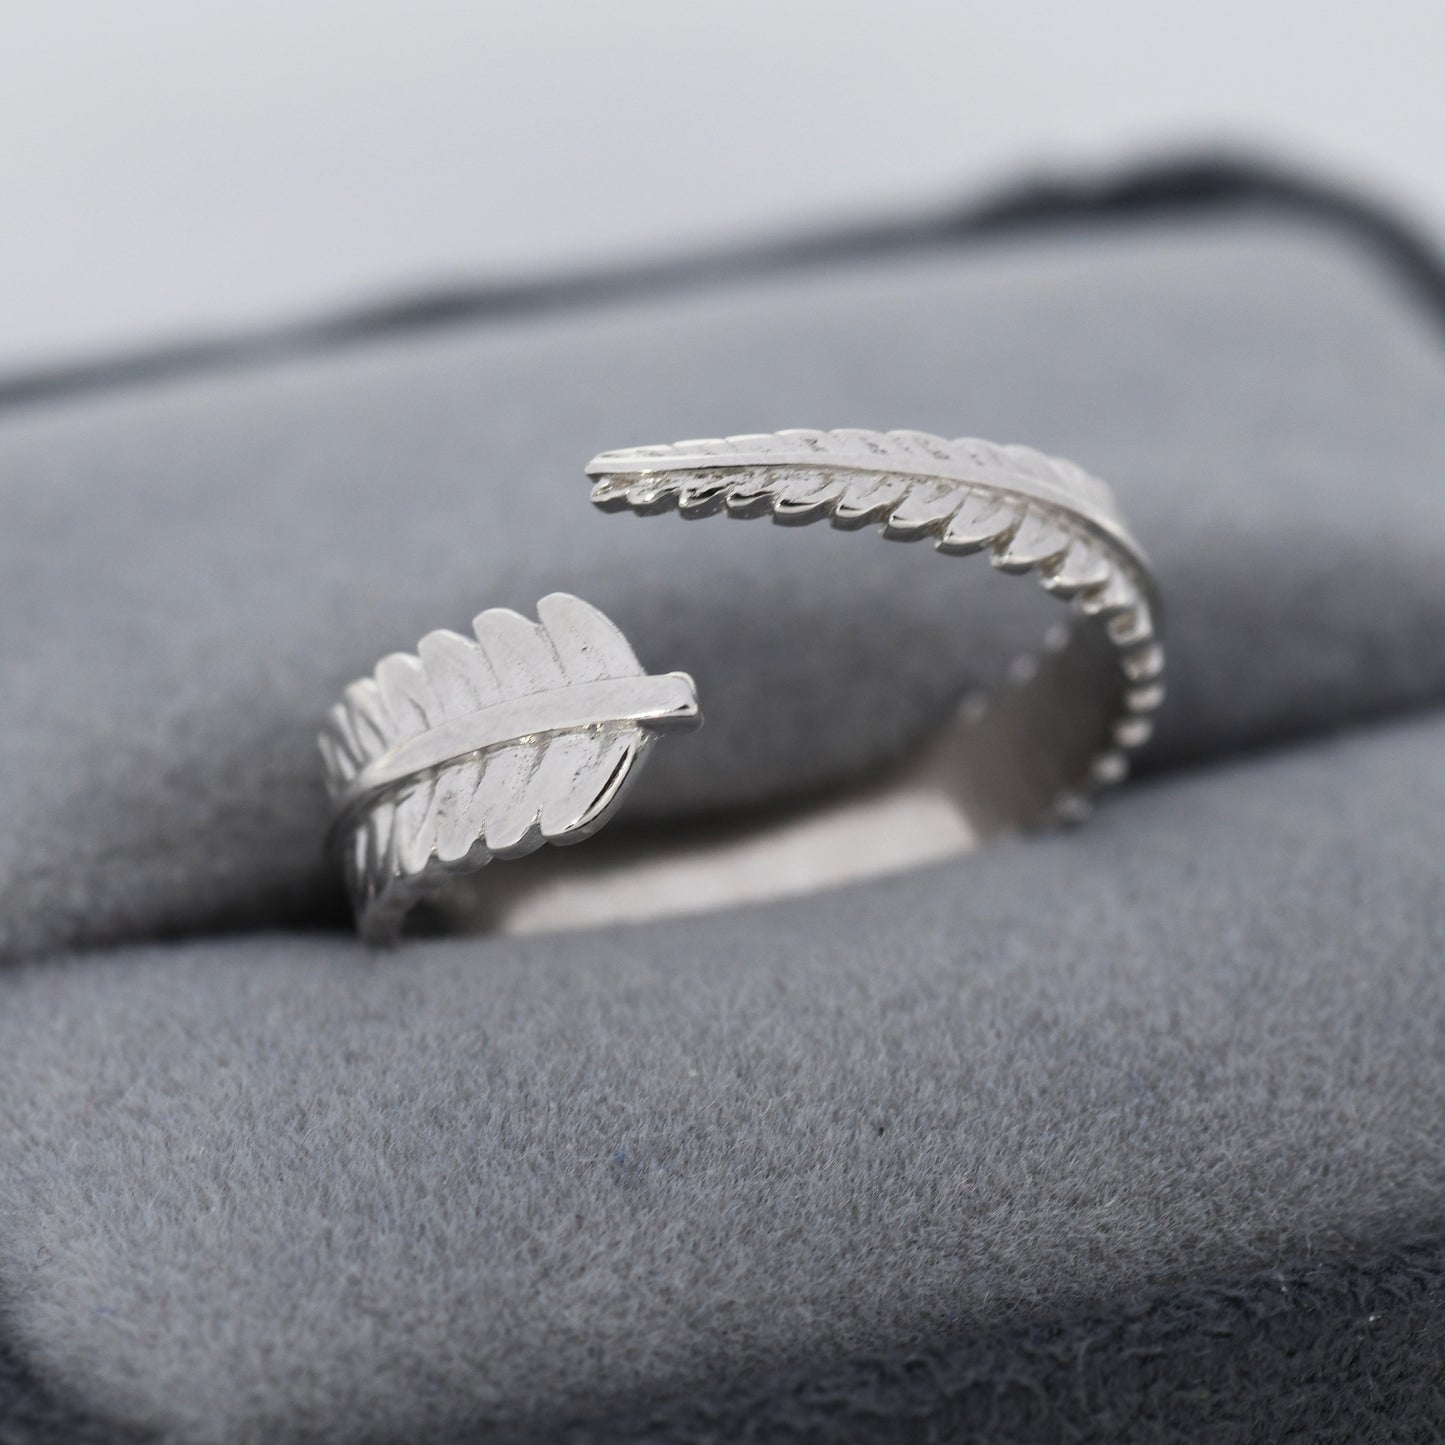 Fern Leaf Ring in Sterling Silver, Adjustable Ring, Silver or Gold, Leaf Ring, Nature Inspired Botanical Jewellery